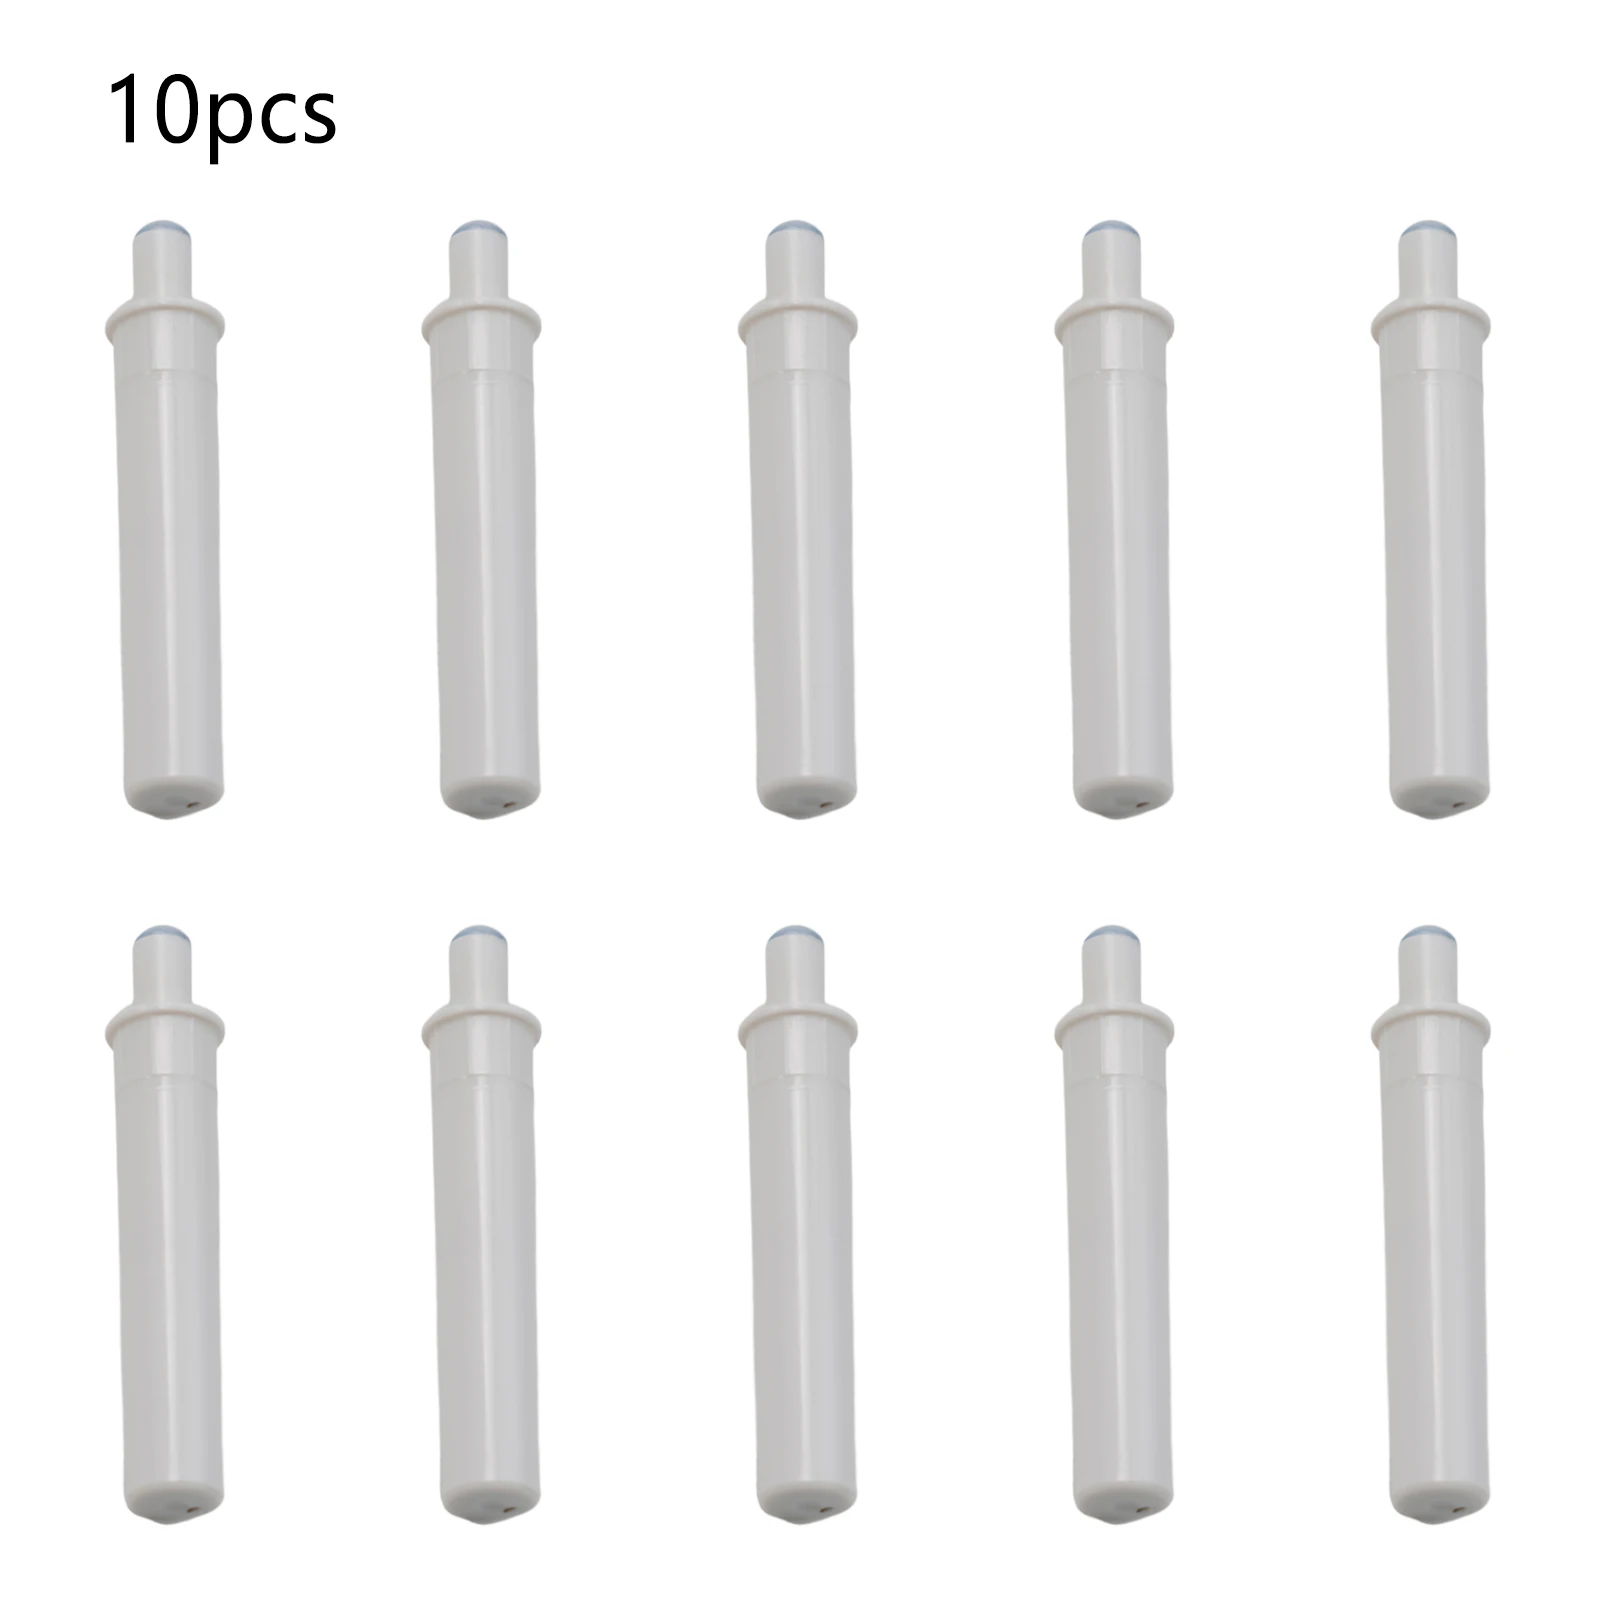 10pcs Push To Open System Damper Buffer For Cabinet Door Cupboard Catch For Home Kitchen Furniture Hardware Accessories